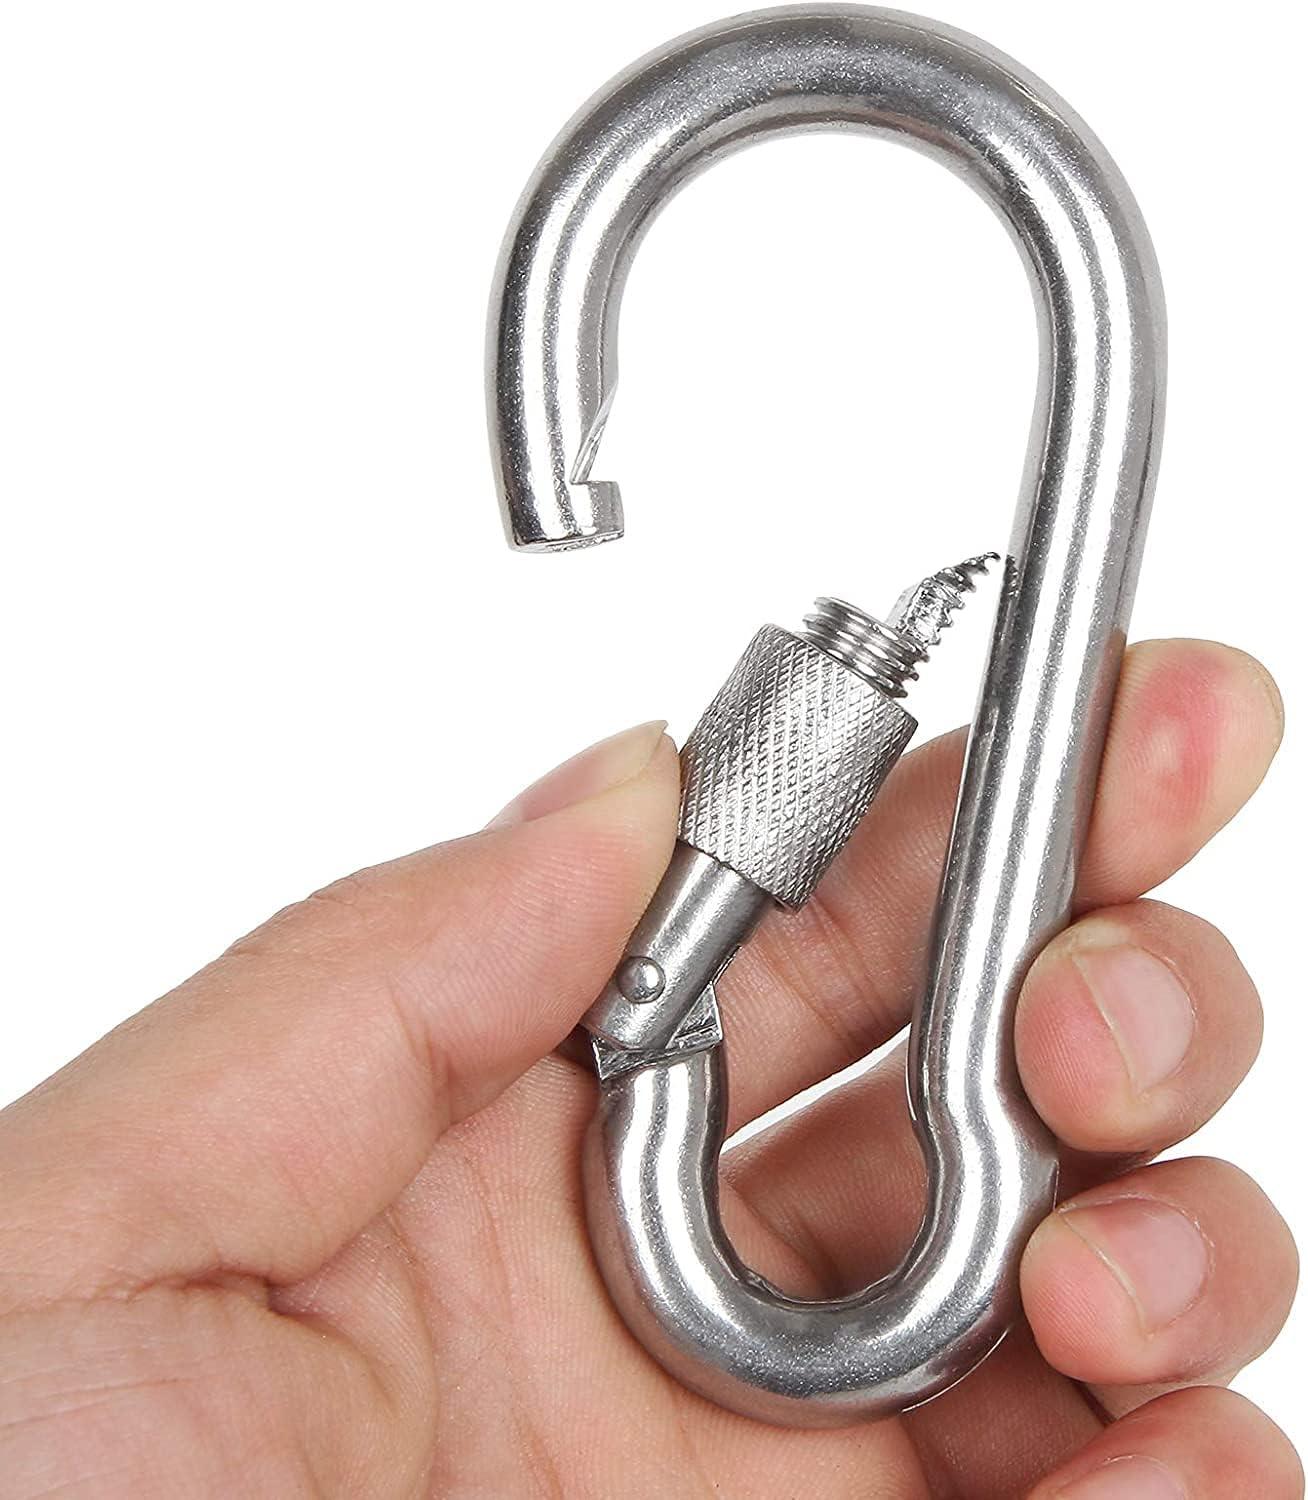 2 Pcs Stainless Steel Spring Snap Hook Screw Locking Carabiner Heavy Duty  Carabiner Clips for Hiking Camping Fishing Stainless Steel Spring Snap Hook